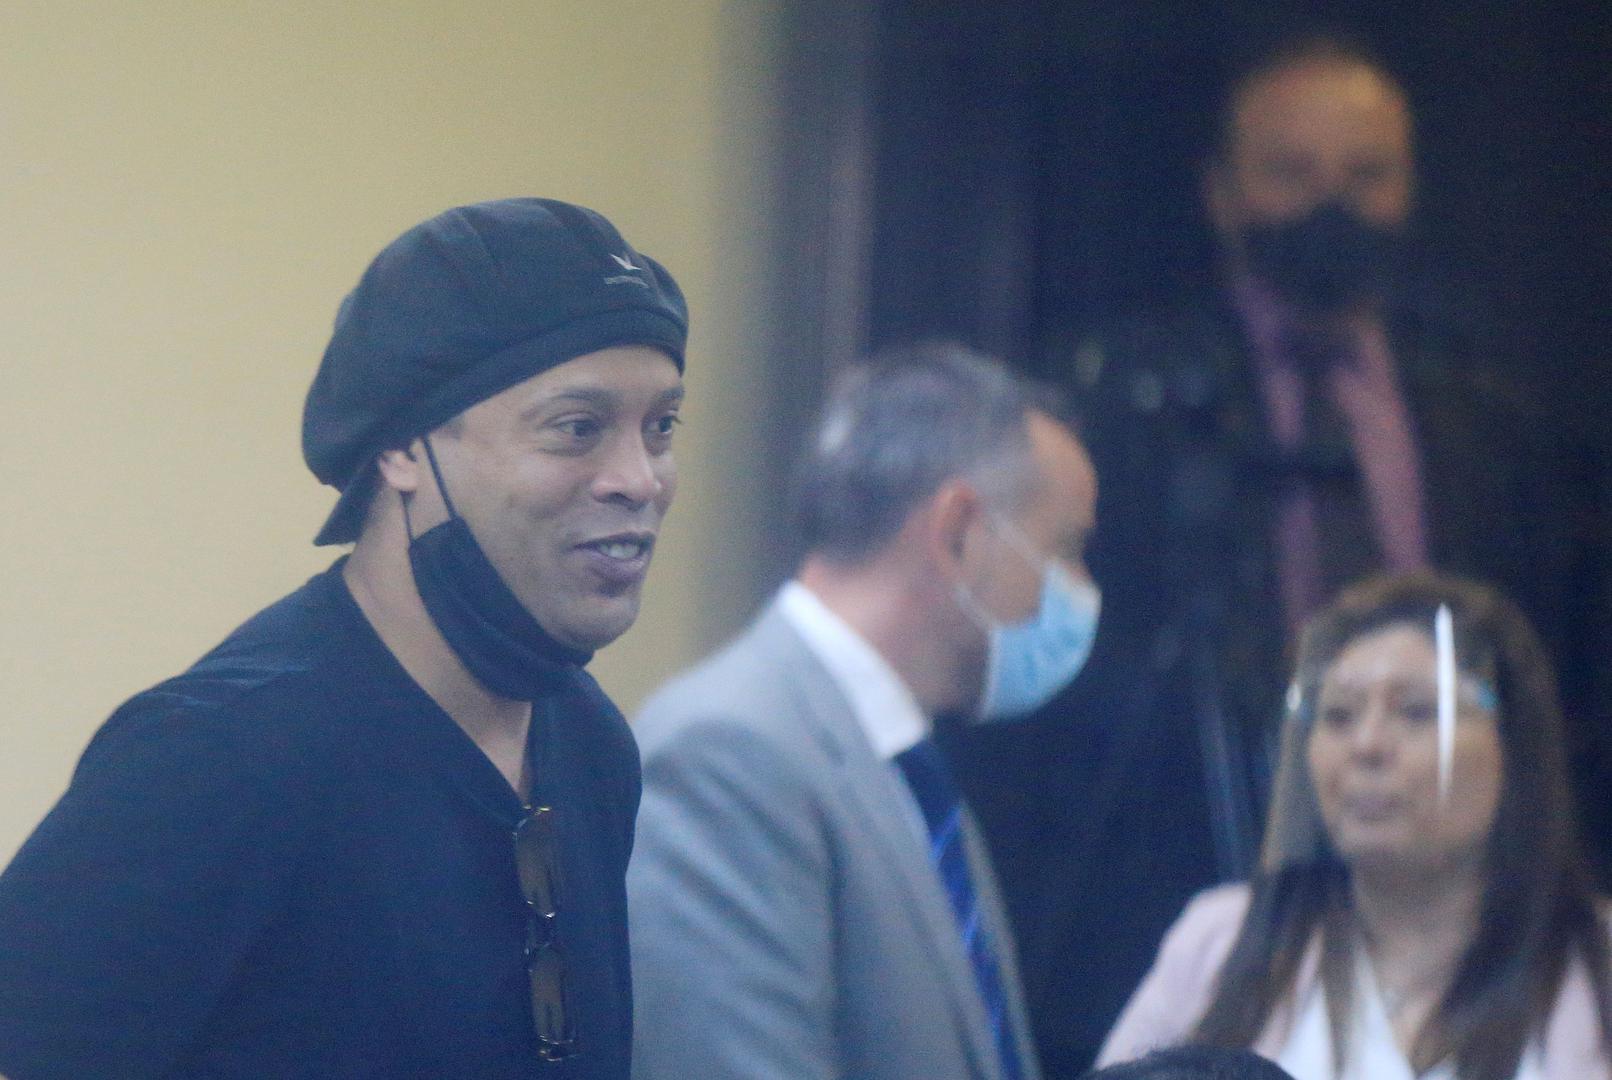 Ronaldinho during the hearing at the Supreme Court of Justice where he could be released from the home prison he has been holding for 4 months in a hotel in Asuncion Ronaldinho during the hearing at the Supreme Court of Justice where he could be released from the home prison he has been holding for 4 months in a hotel in Asuncion, Paraguay, August 24, 2020. REUTERS/Jorge Adorno JORGE ADORNO